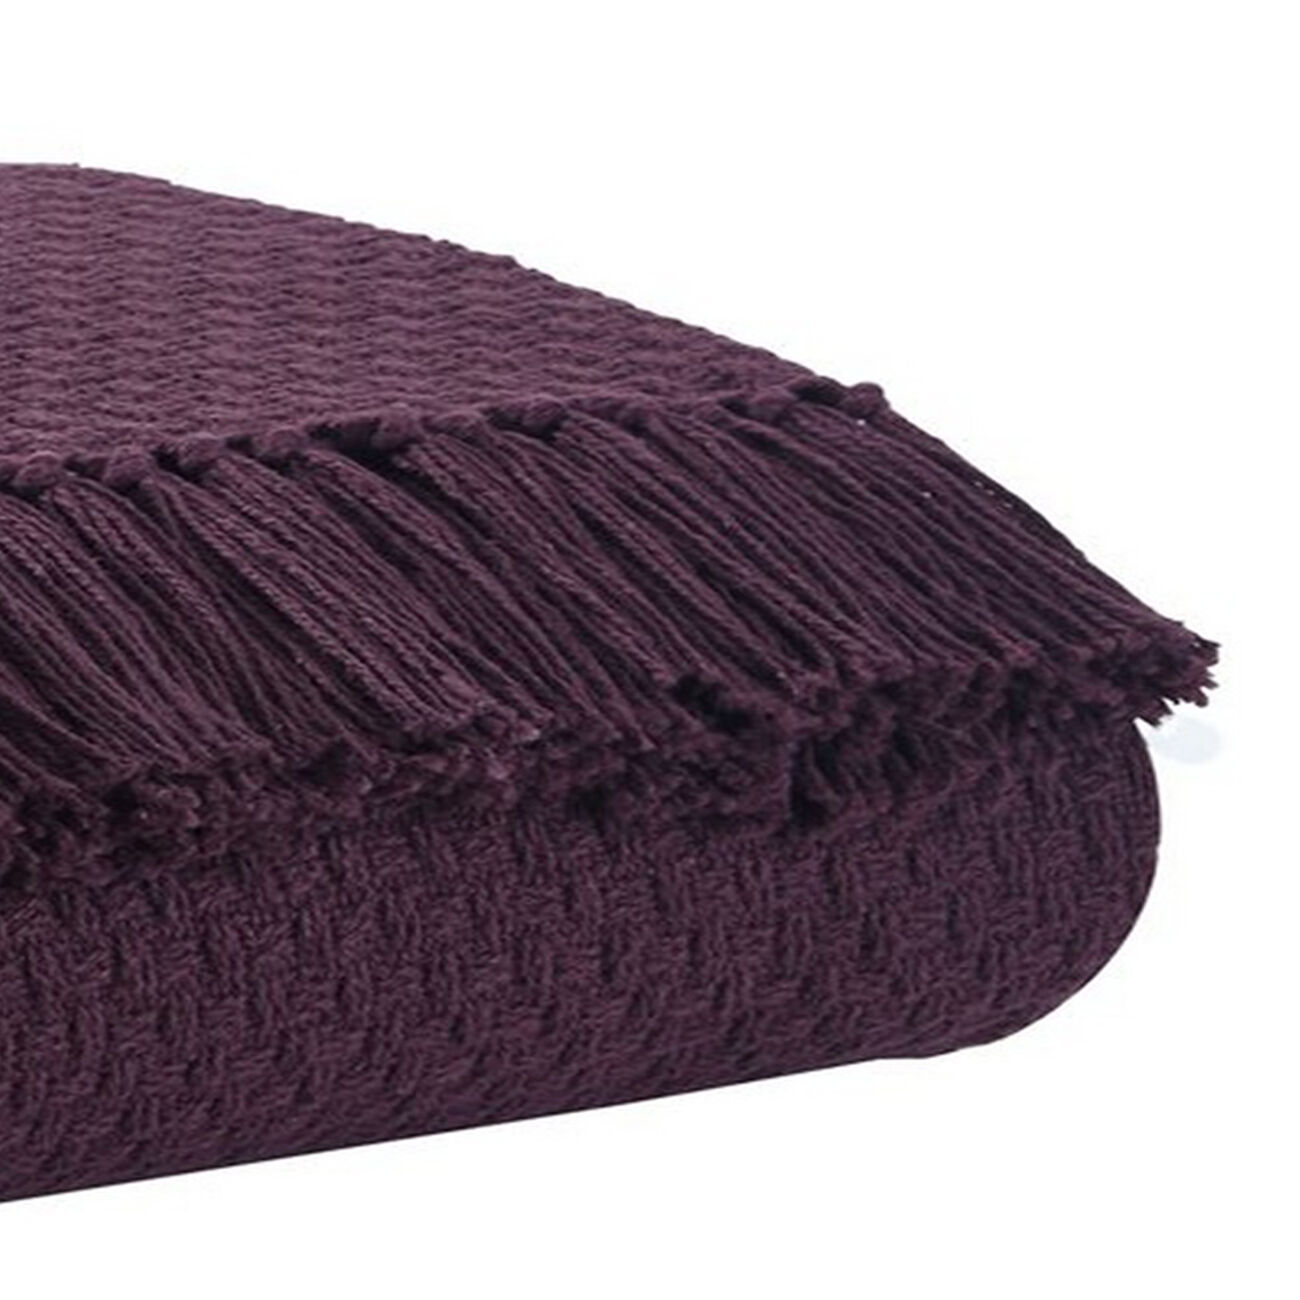 60 x 50 Cotton Throw with Textured and Fringe Details, Set of 3, Purple